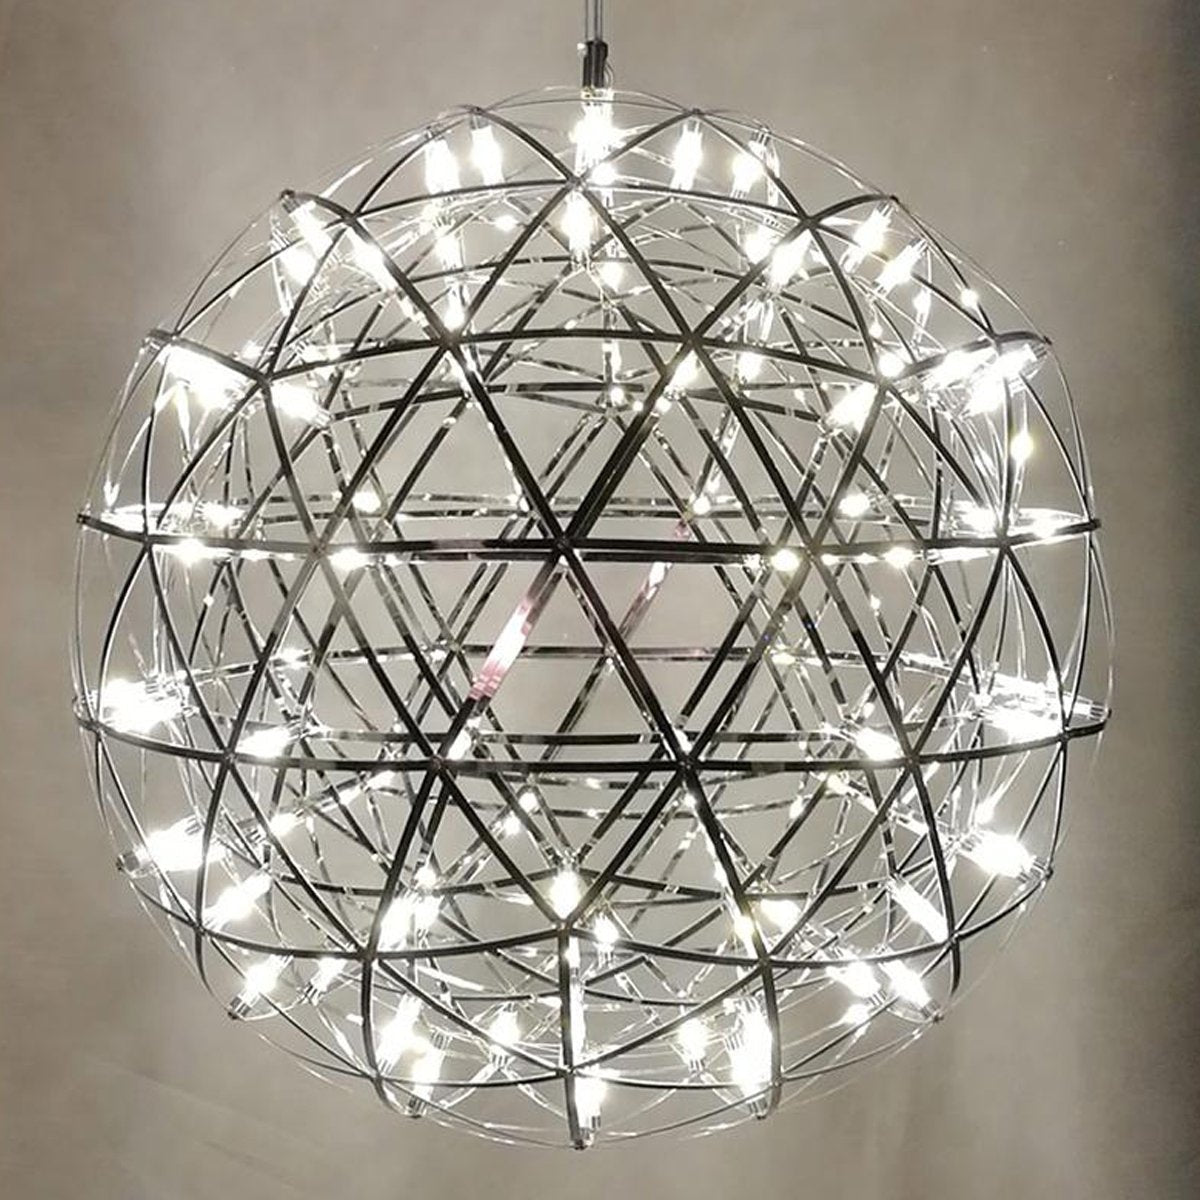 FAWKES - CGC Chrome Extra Large Silver Firework / Starburst Chandelier